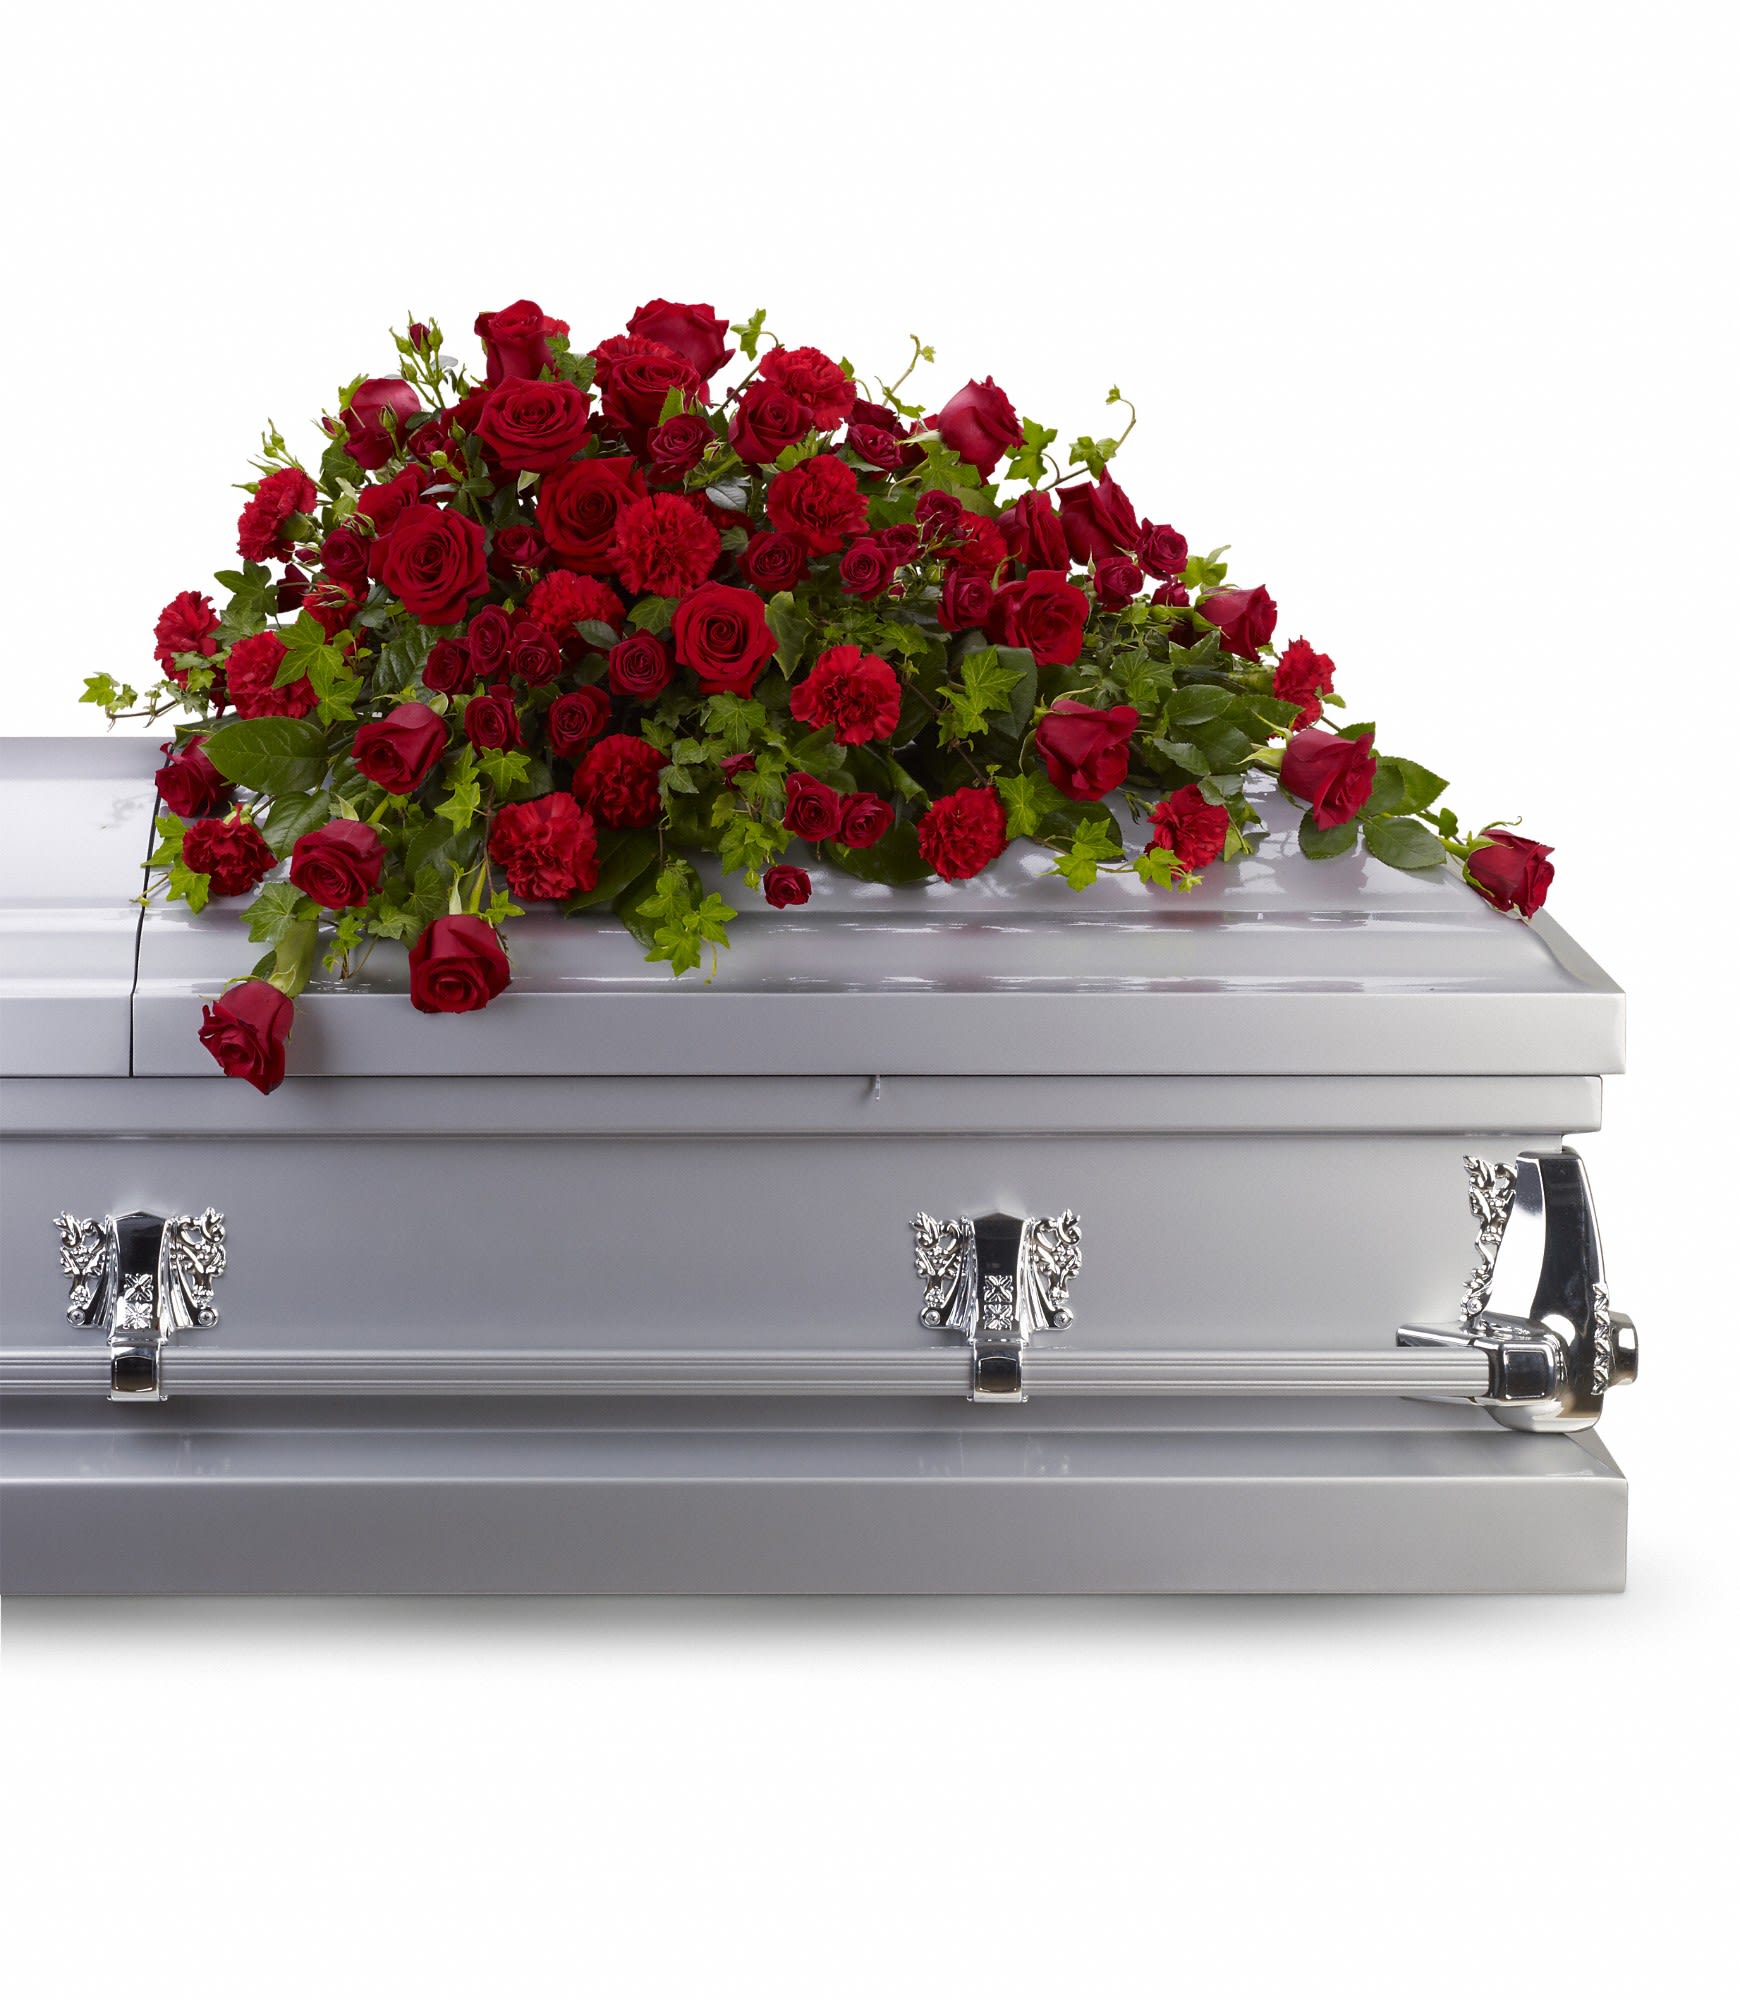 Red Rose Reverence Casket Spray by Teleflora - Red roses tell a story of love, beauty, and strength. This all-red spray graces the casket with accents of trailing ivy.  